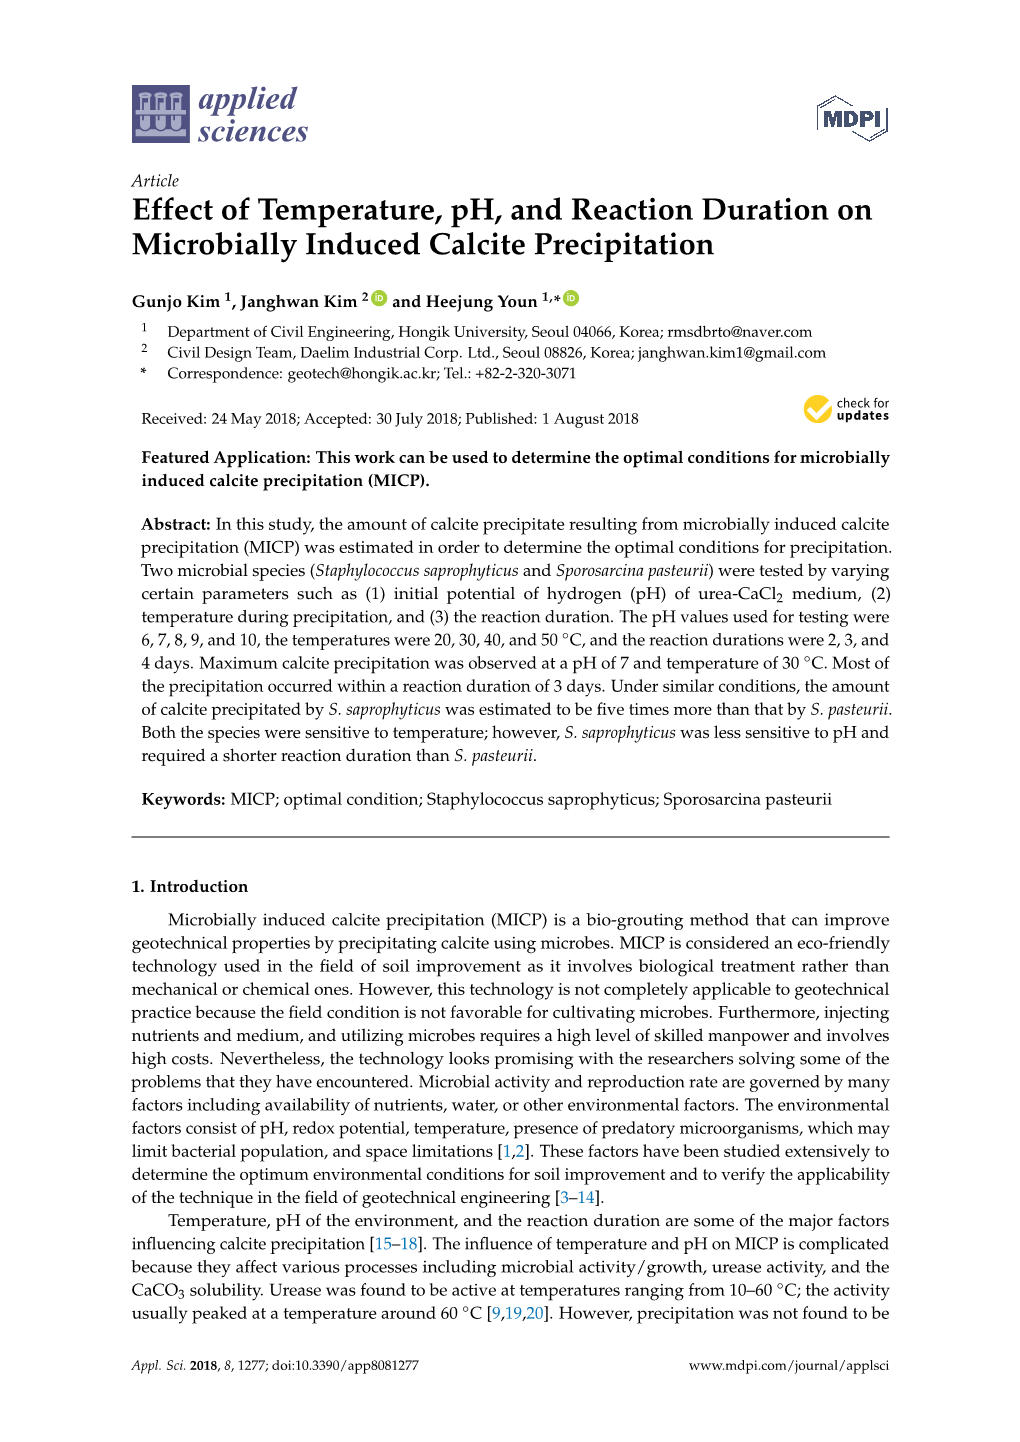 Effect of Temperature, Ph, and Reaction Duration on Microbially Induced Calcite Precipitation